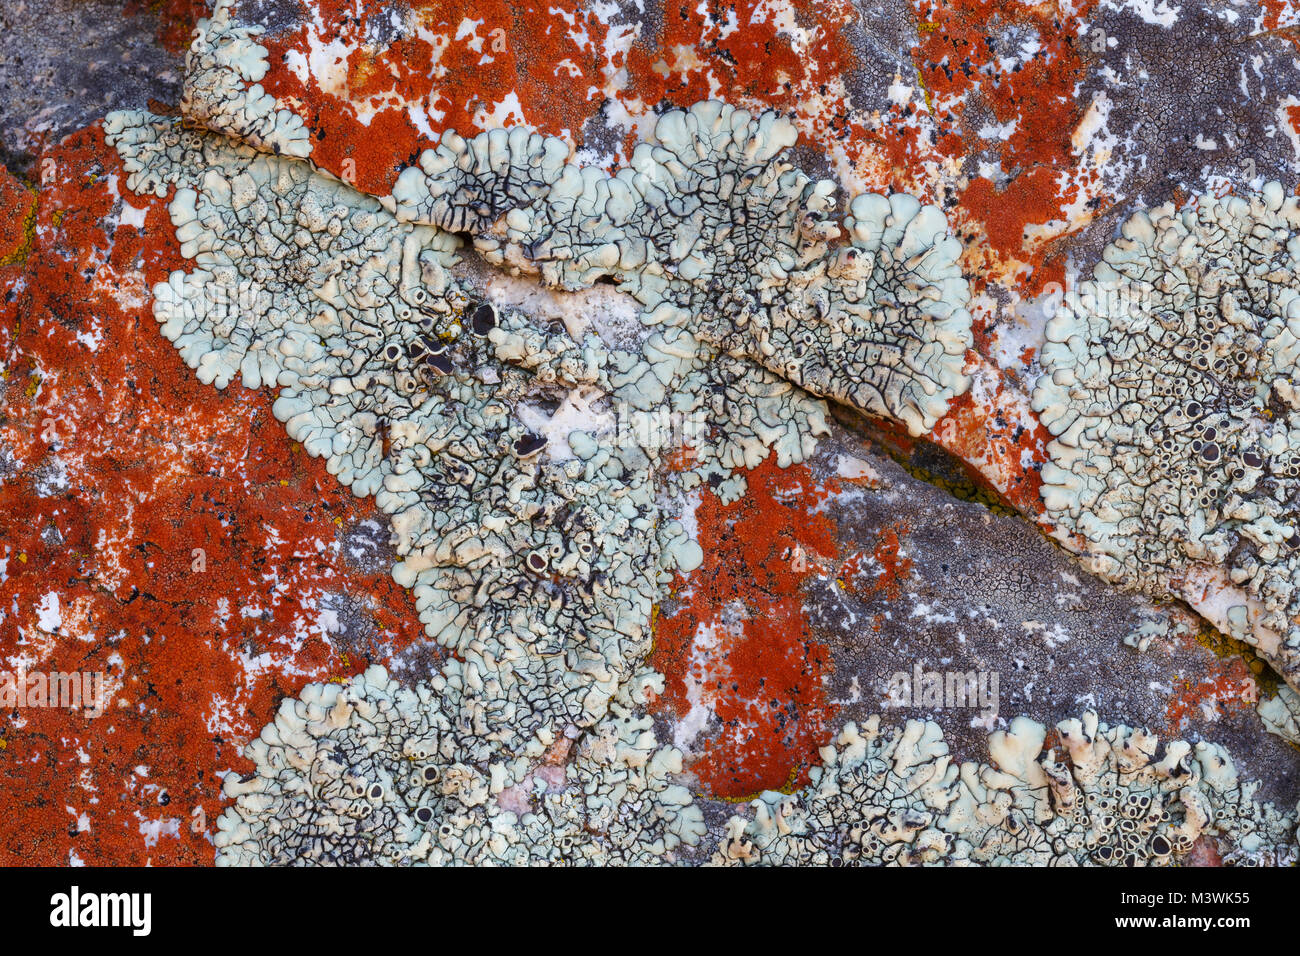 Red and grey lichen growing on rock, Cederberg Mountains, South Africa Stock Photo